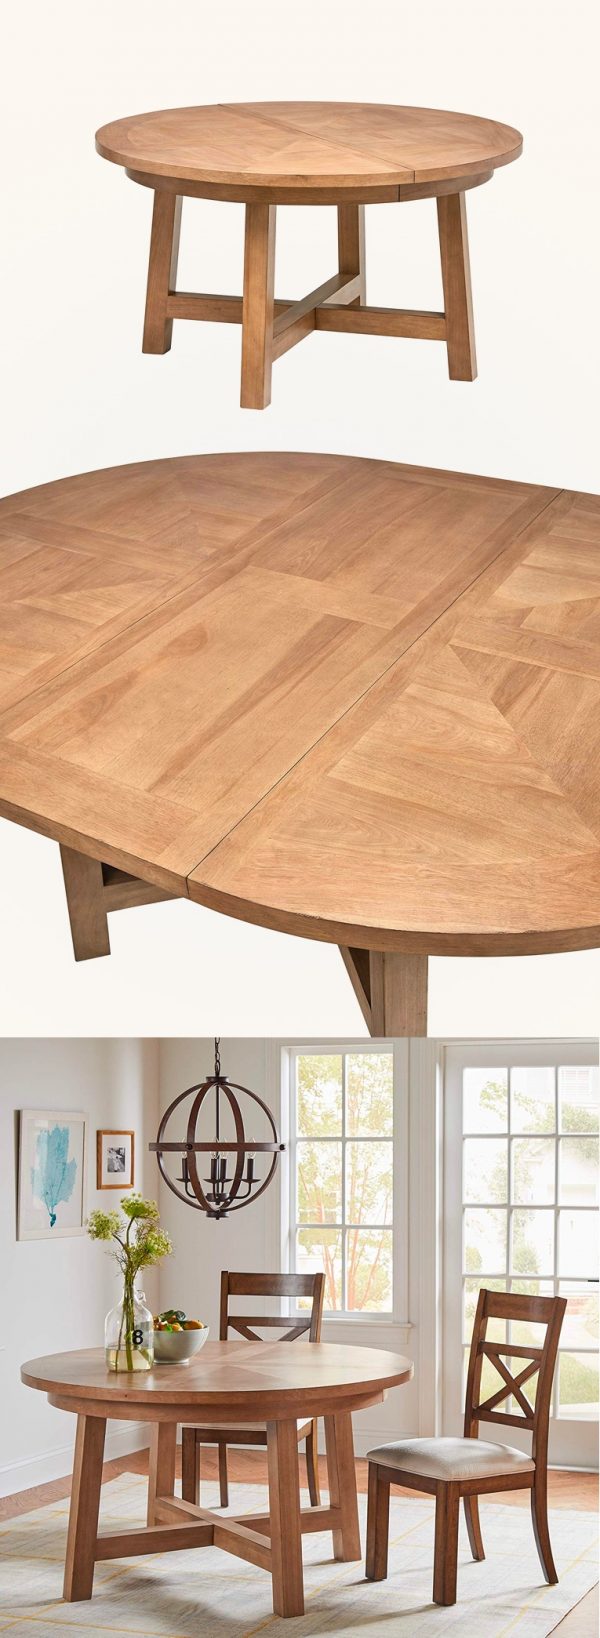 51 Round Dining Tables That Save On Space But Never Skimp On Style,Virtual Reality Room Design